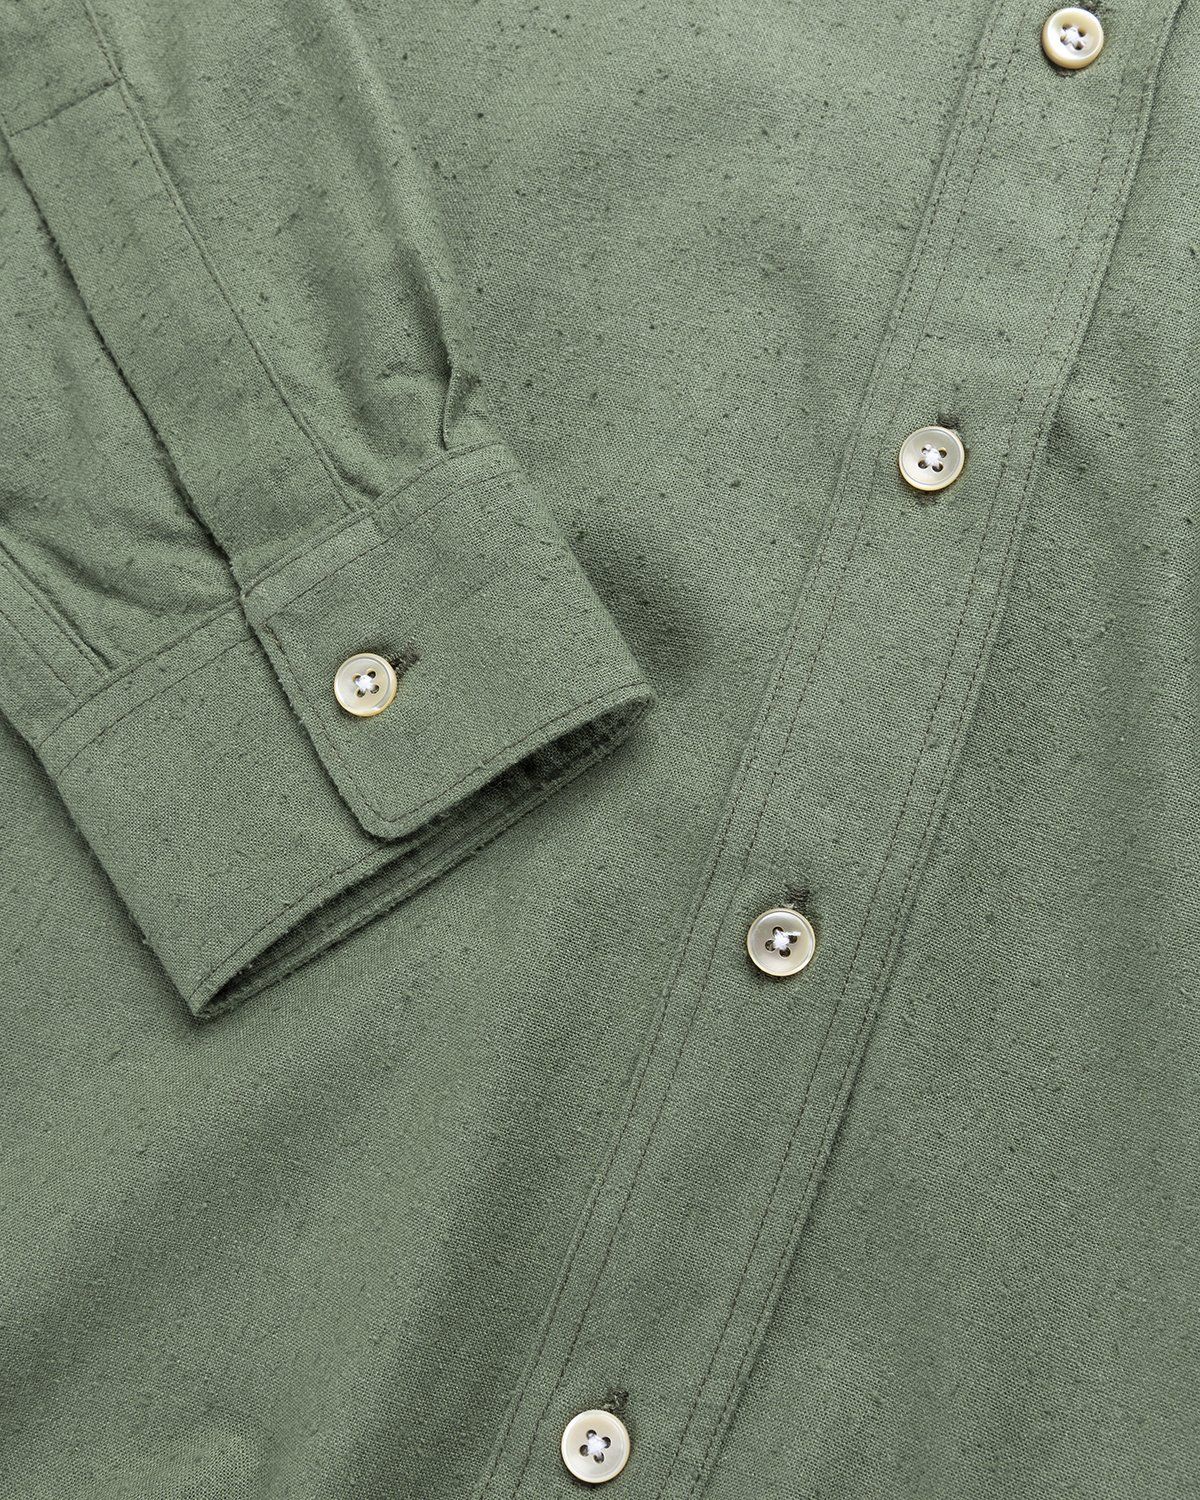 Our Legacy – Classic Shirt Ivy Green - Longsleeve Shirts - Green - Image 3